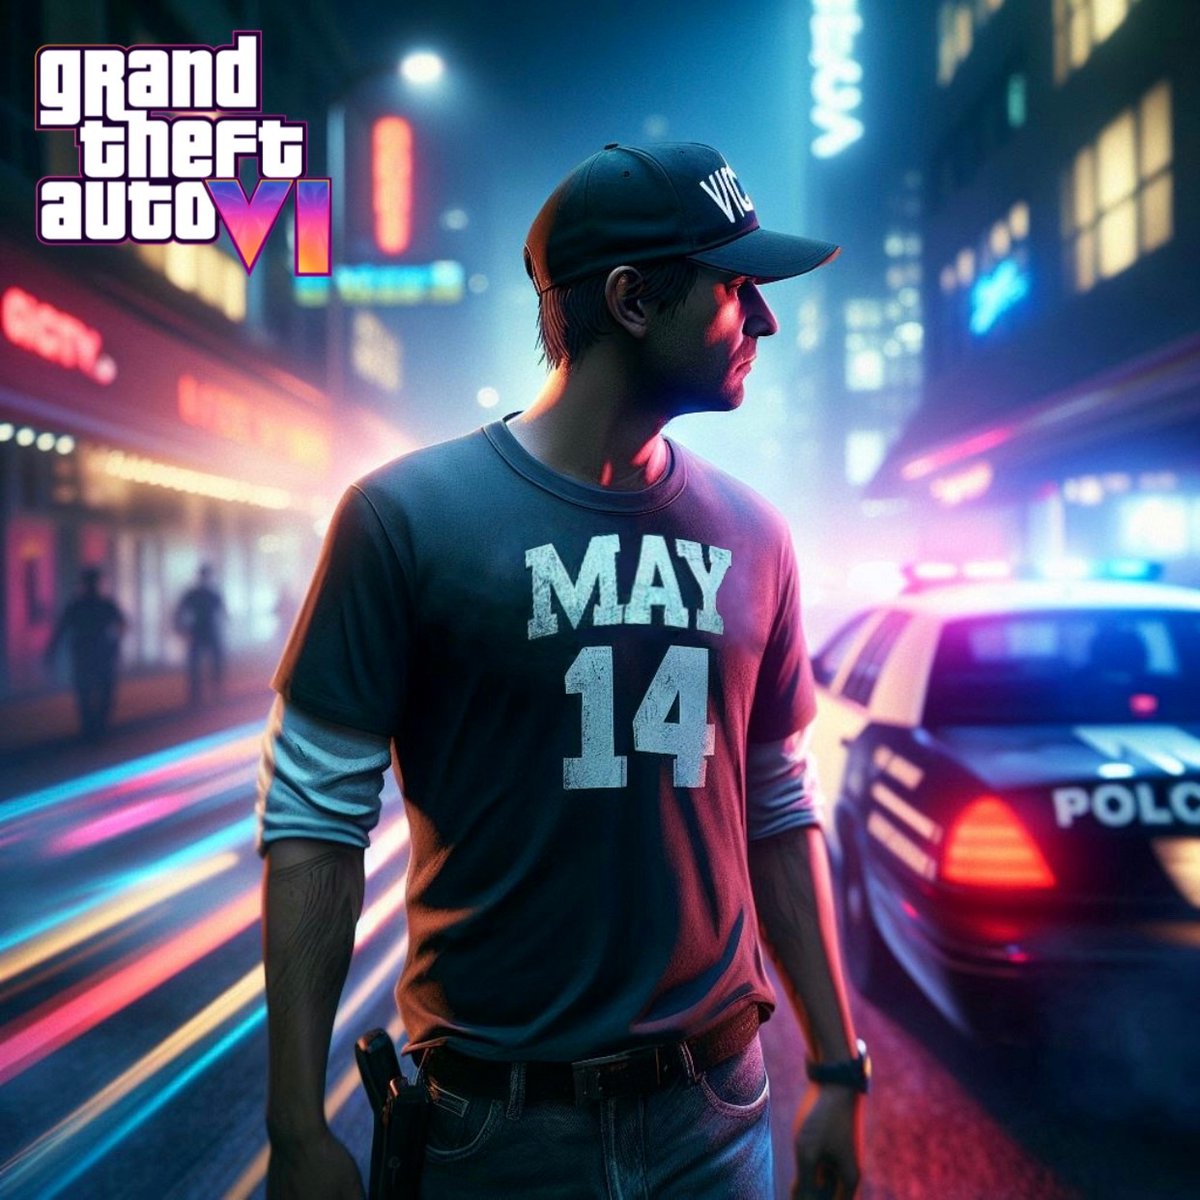 Today, we could finally get new GTA 6 info after 5 months of silence. - Rockstar hasn’t posted in 4 days. - They still intentionally have only ‘14’ posts on Instagram. - Rockstar usually makes their biggest announcements on Tuesdays. #GTAVI #GTA6